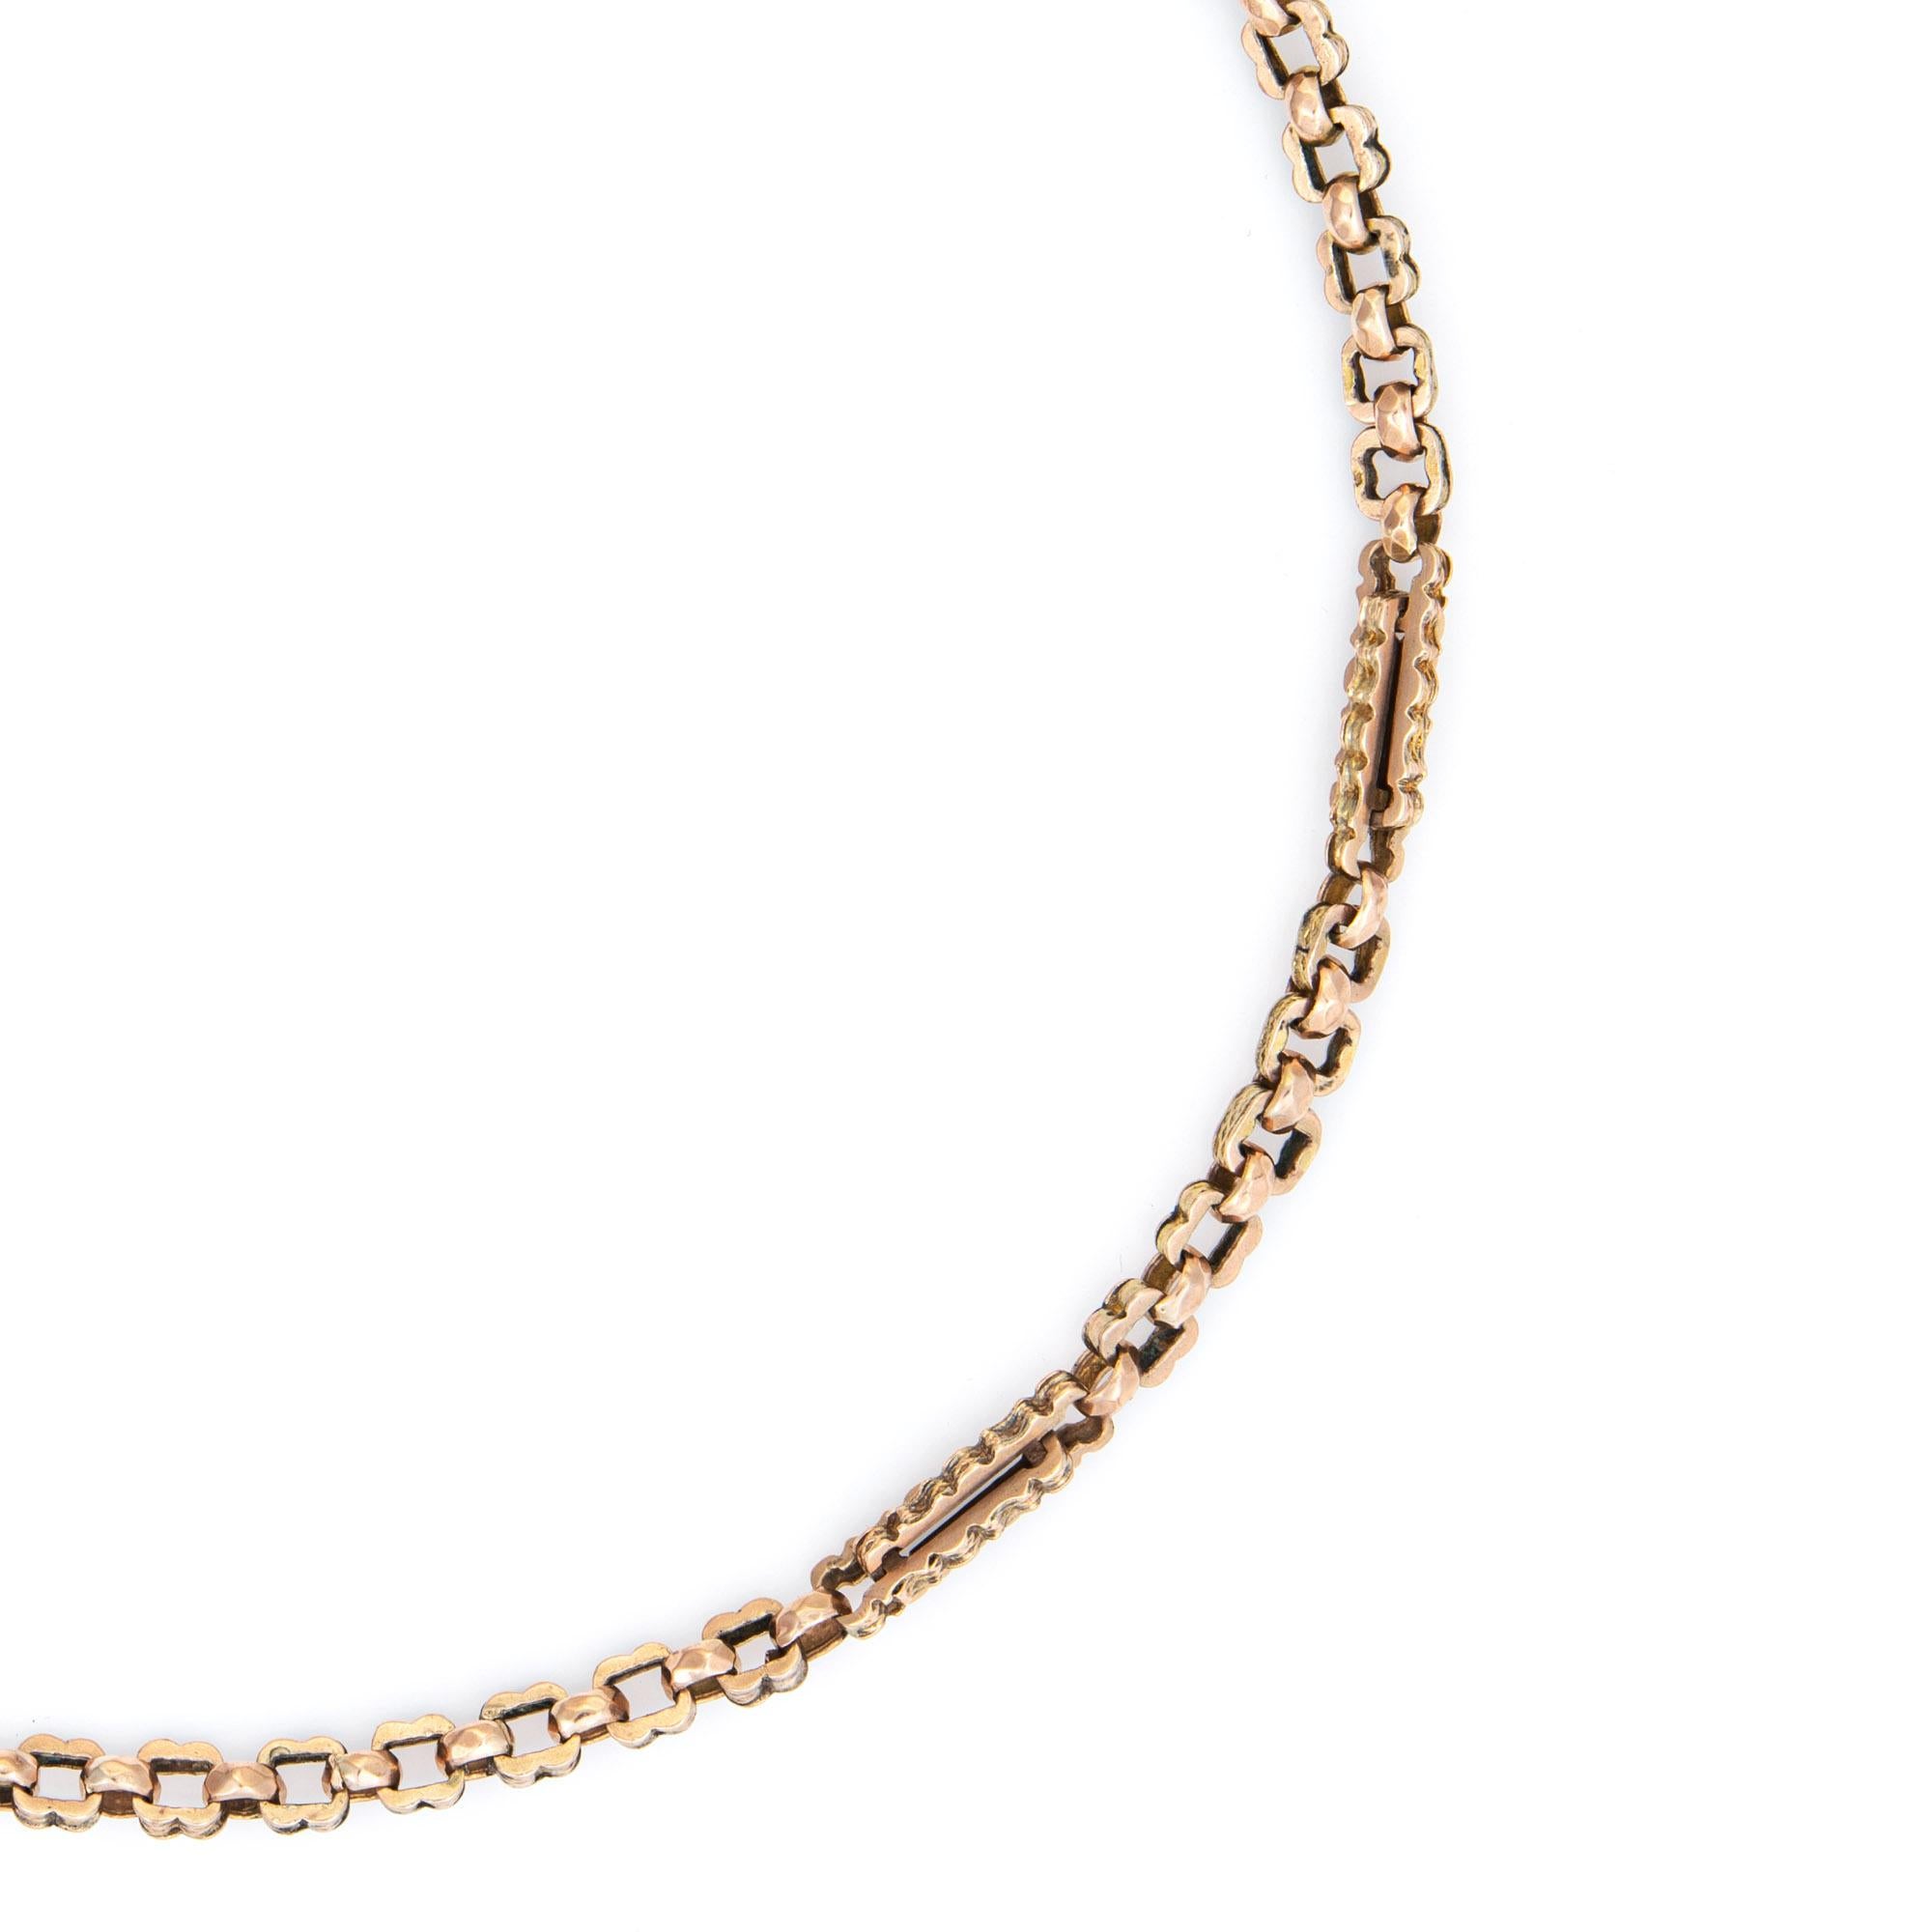 Stylish and finely detailed antique Victorian watch chain necklace crafted in 9k rose gold (circa 1880s to 1900s).  

The fancy link necklace features elongated links with repeating rows of textured design, crafted in rosy 9k gold. Originally a